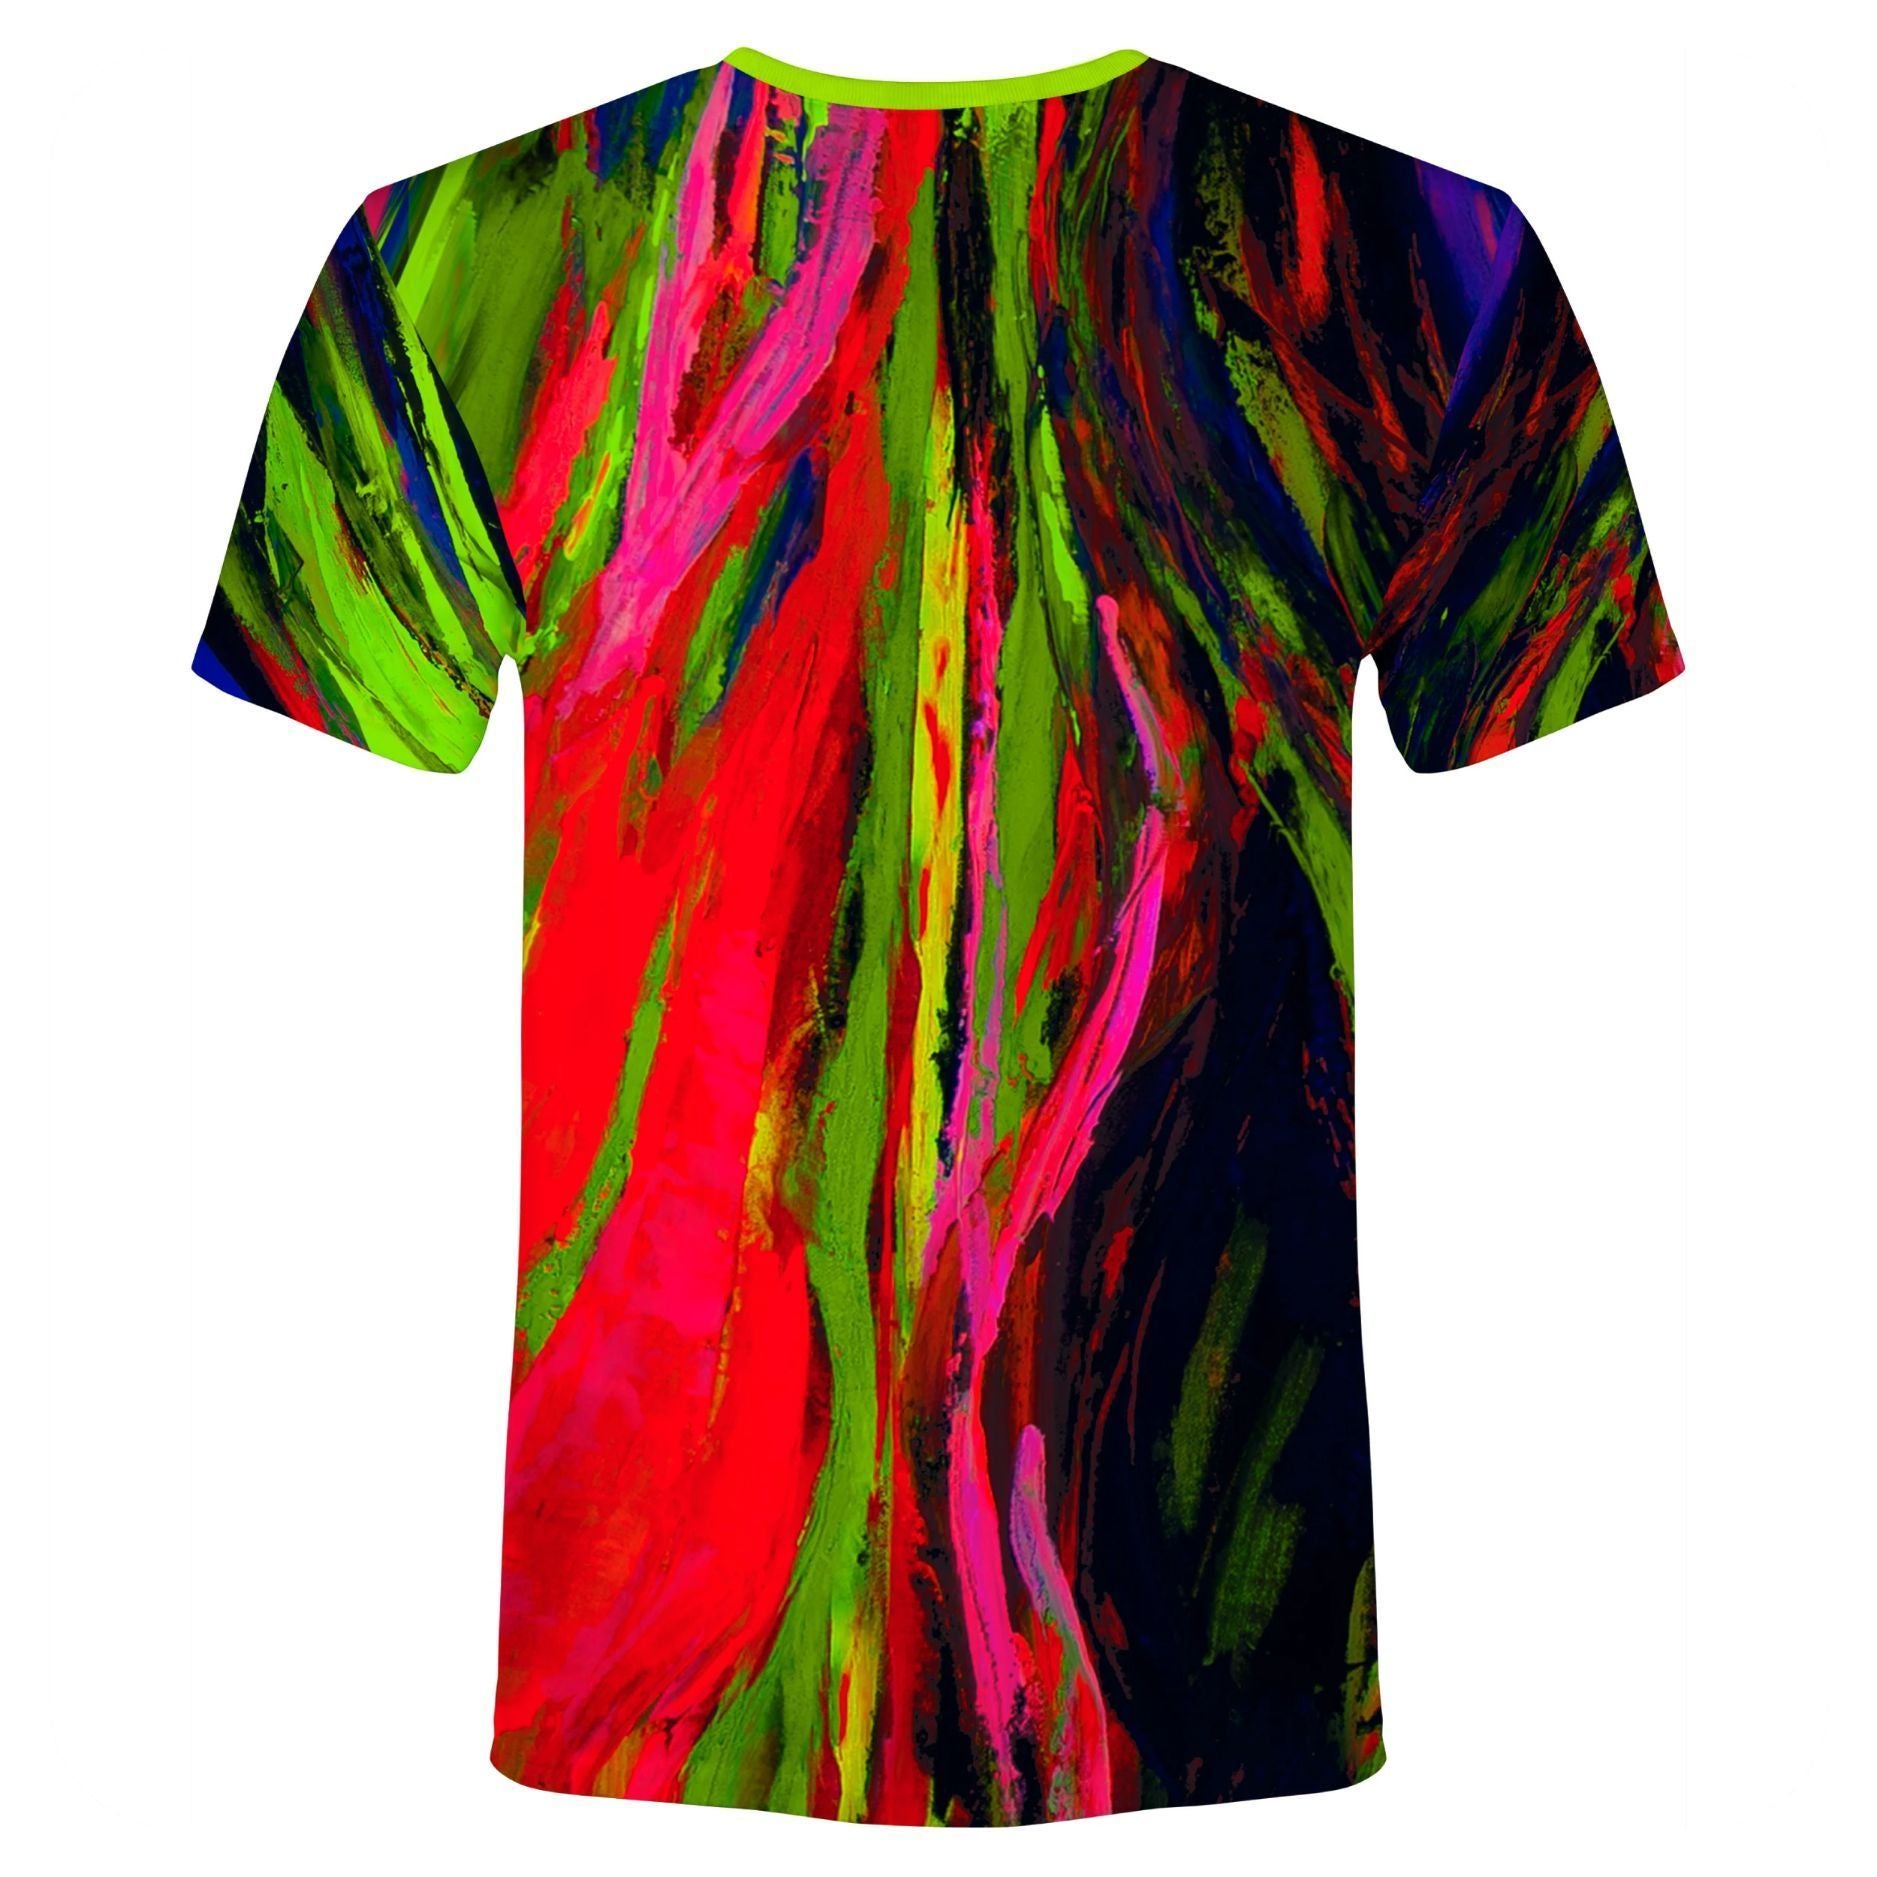 Neon Printed T-Shirt for Women Glow in UV Fluorescent Face Dragon ts8